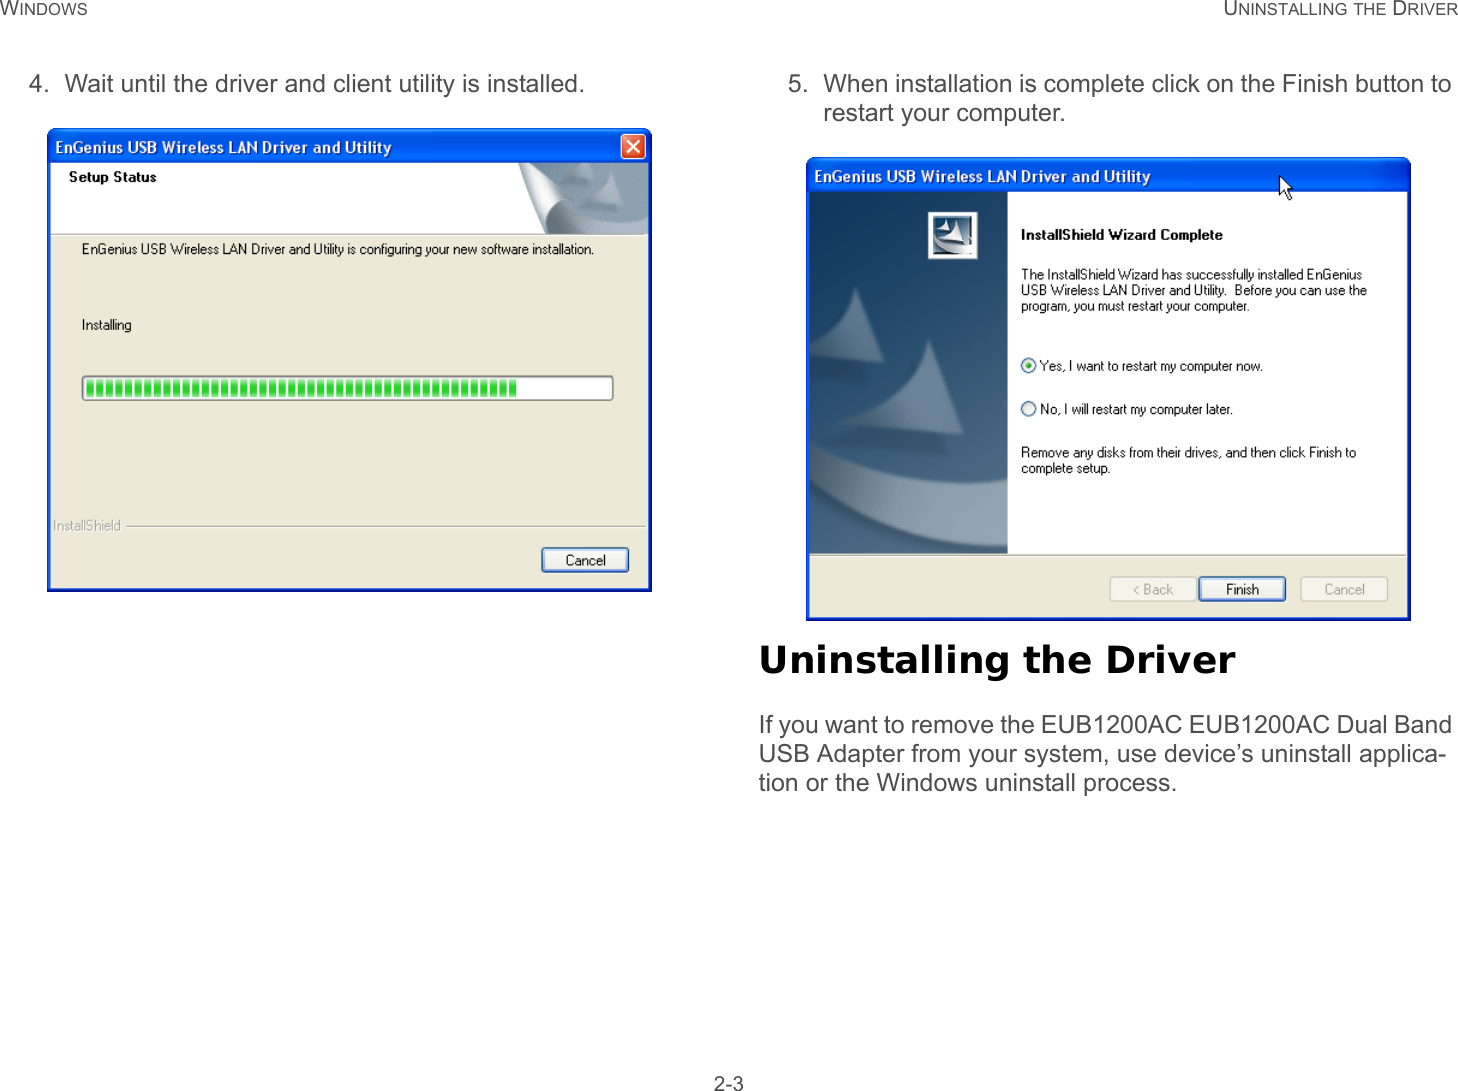 WINDOWS UNINSTALLING THE DRIVER 2-34. Wait until the driver and client utility is installed. 5. When installation is complete click on the Finish button to restart your computer. Uninstalling the DriverIf you want to remove the EUB1200AC EUB1200AC Dual Band USB Adapter from your system, use device’s uninstall applica-tion or the Windows uninstall process.